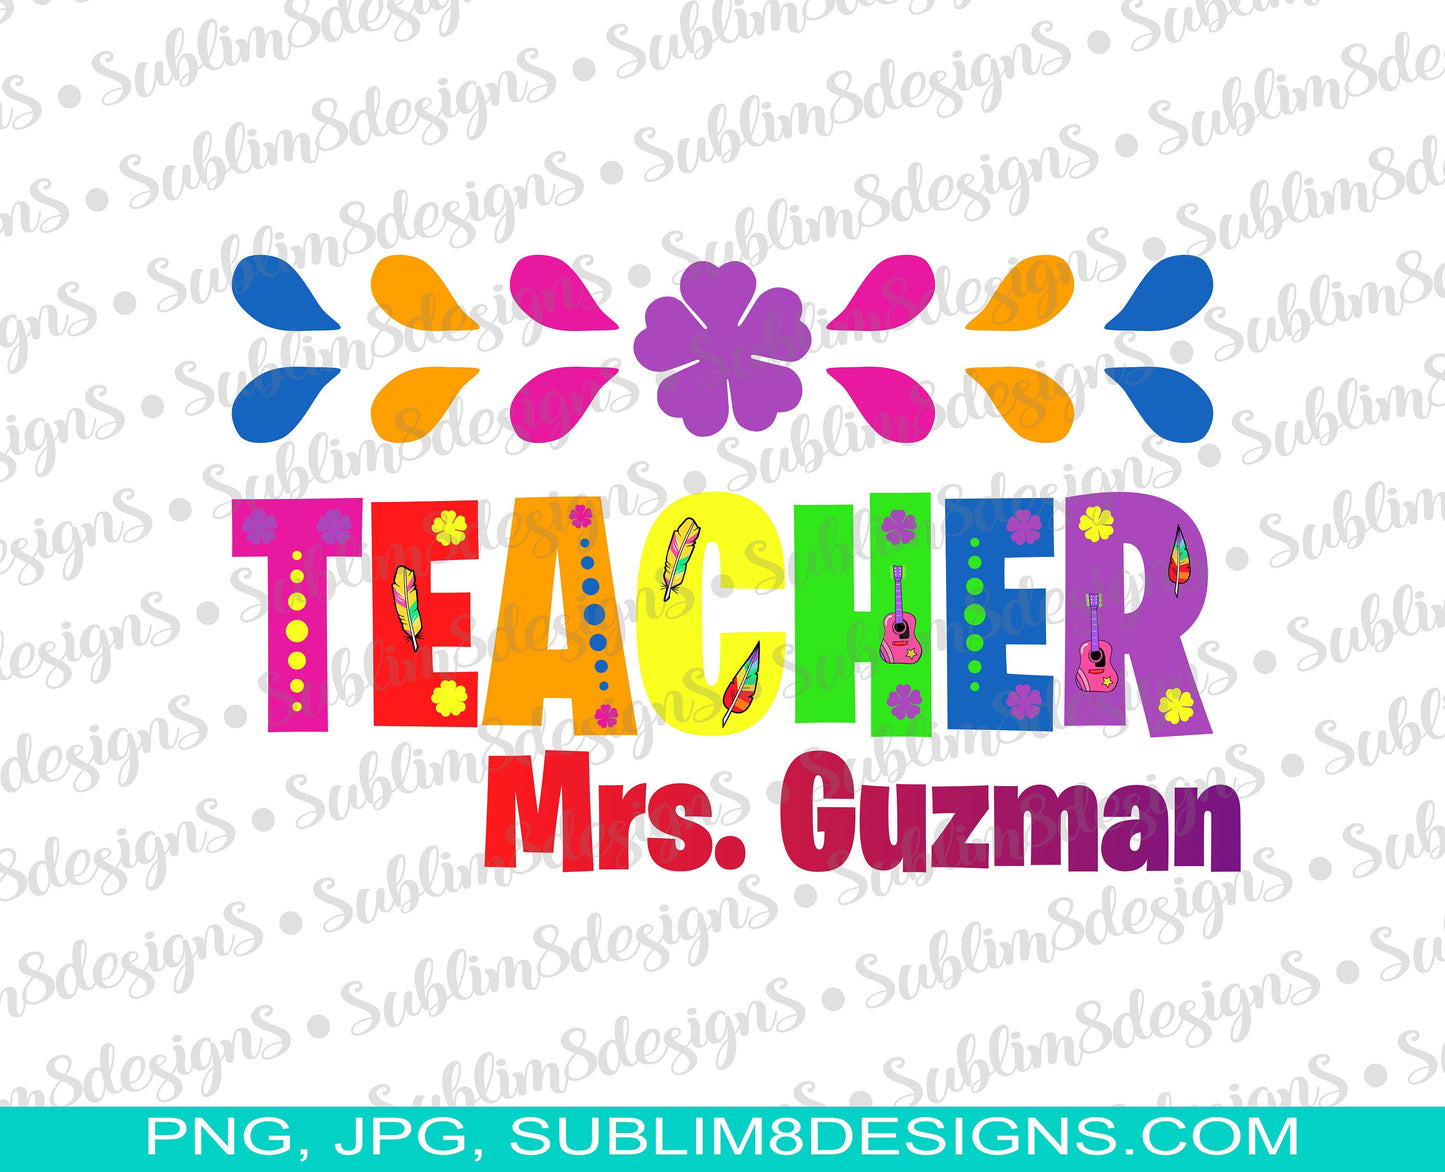 Teacher Design PNG and JPG ONLY